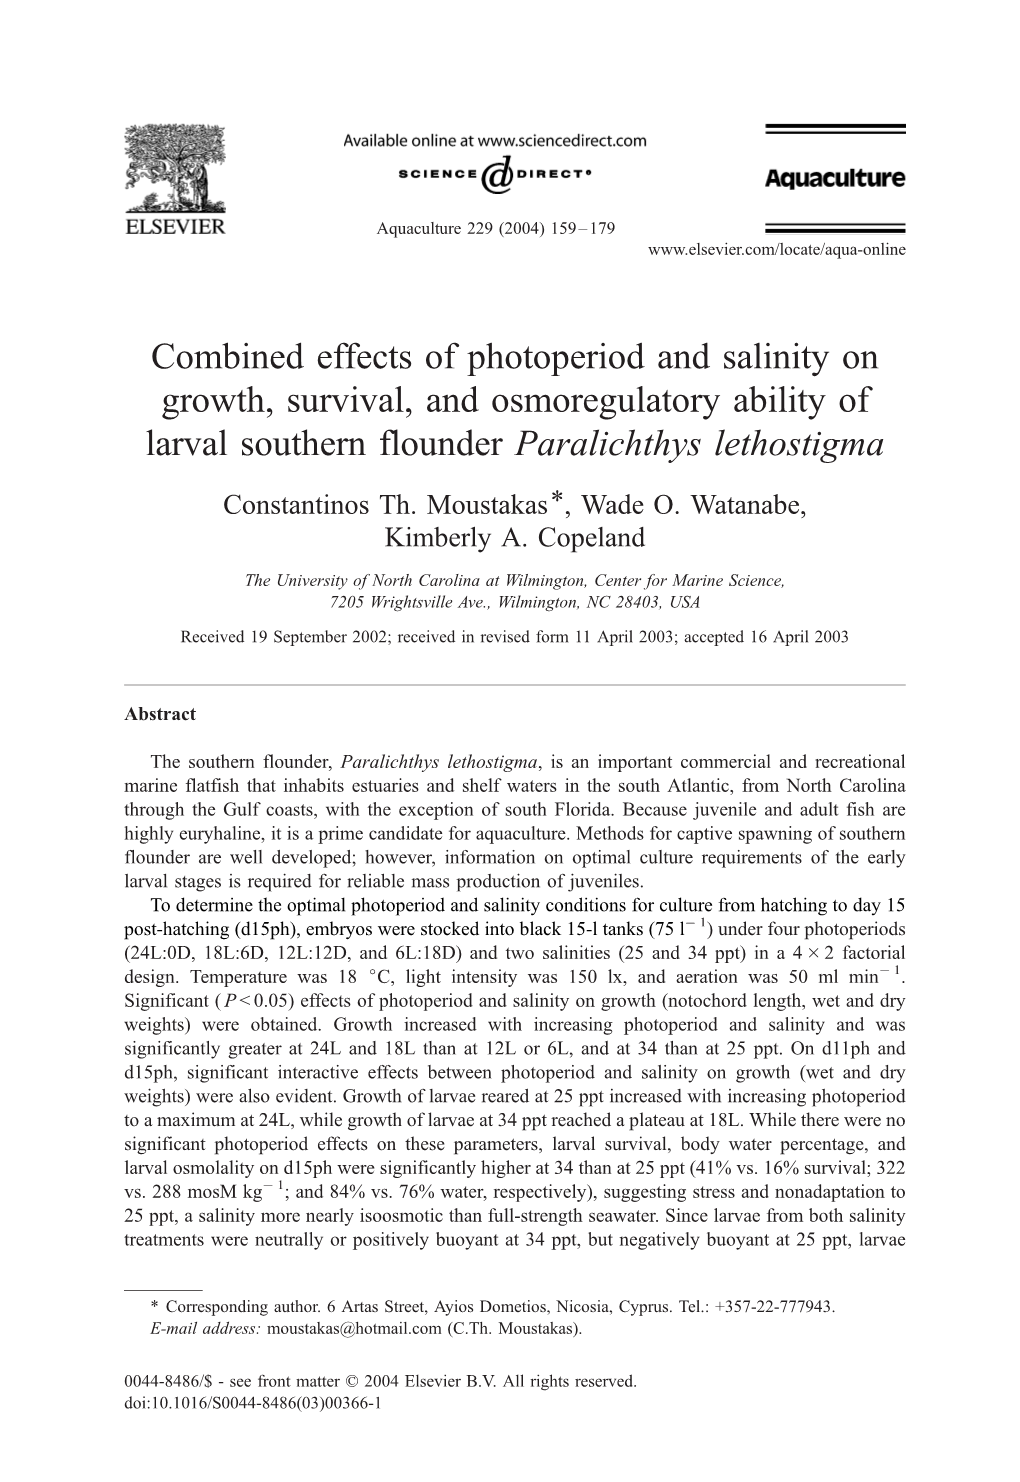 Combined Effects of Photoperiod and Salinity on Growth, Survival, and Osmoregulatory Ability of Larval Southern Flounder Paralichthys Lethostigma